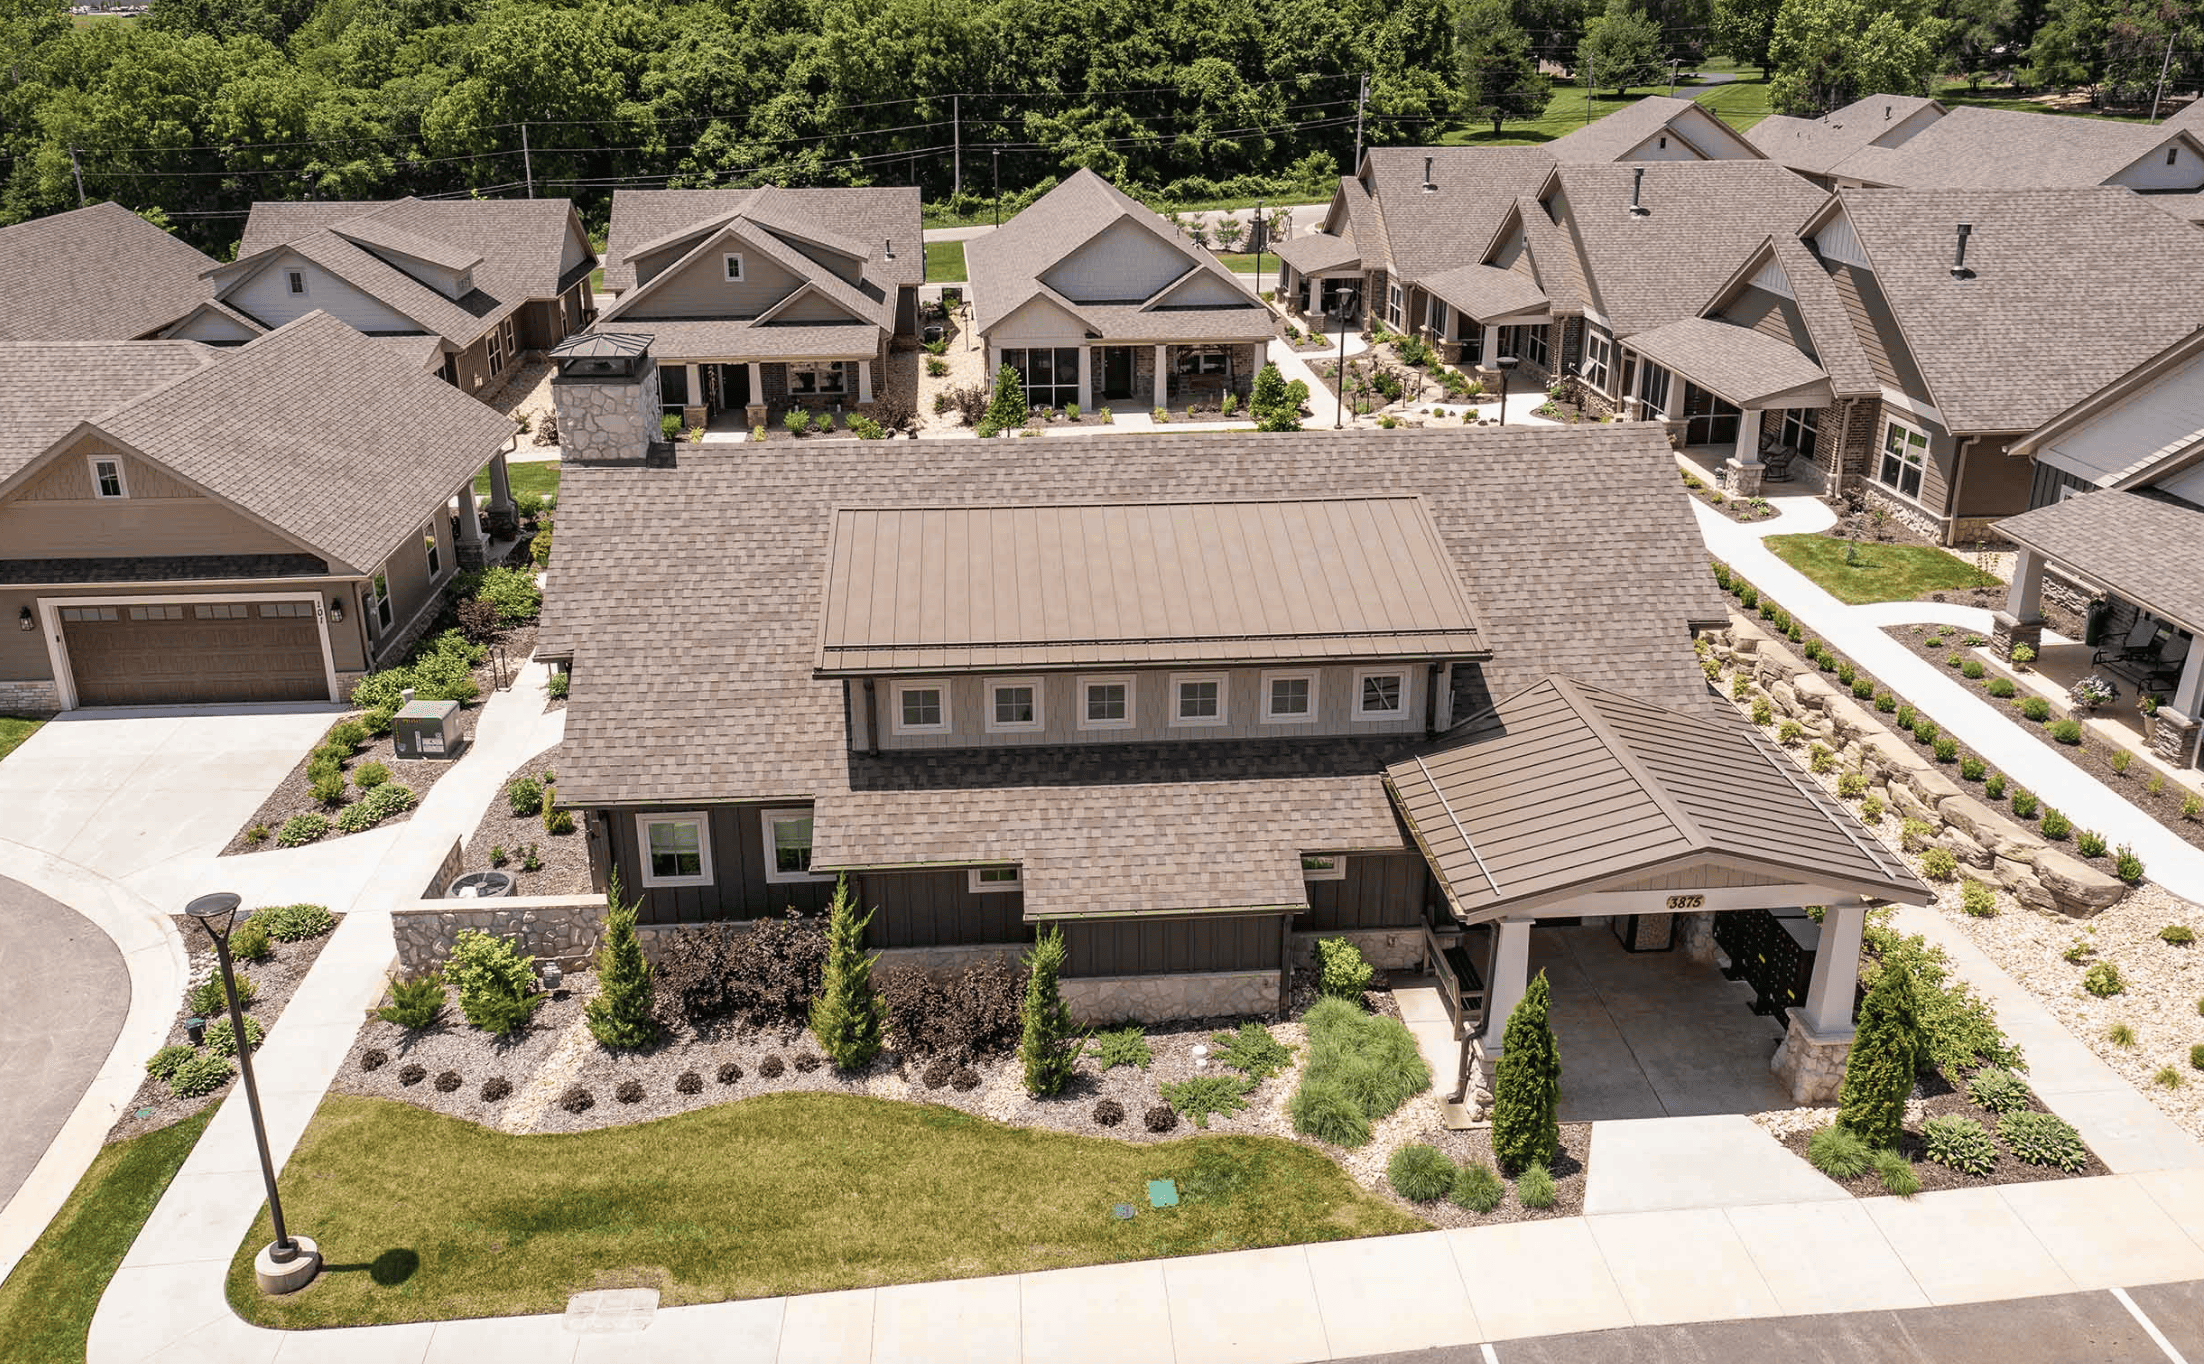 An overhead view of the Springhouse Village neighborhood for seniors.